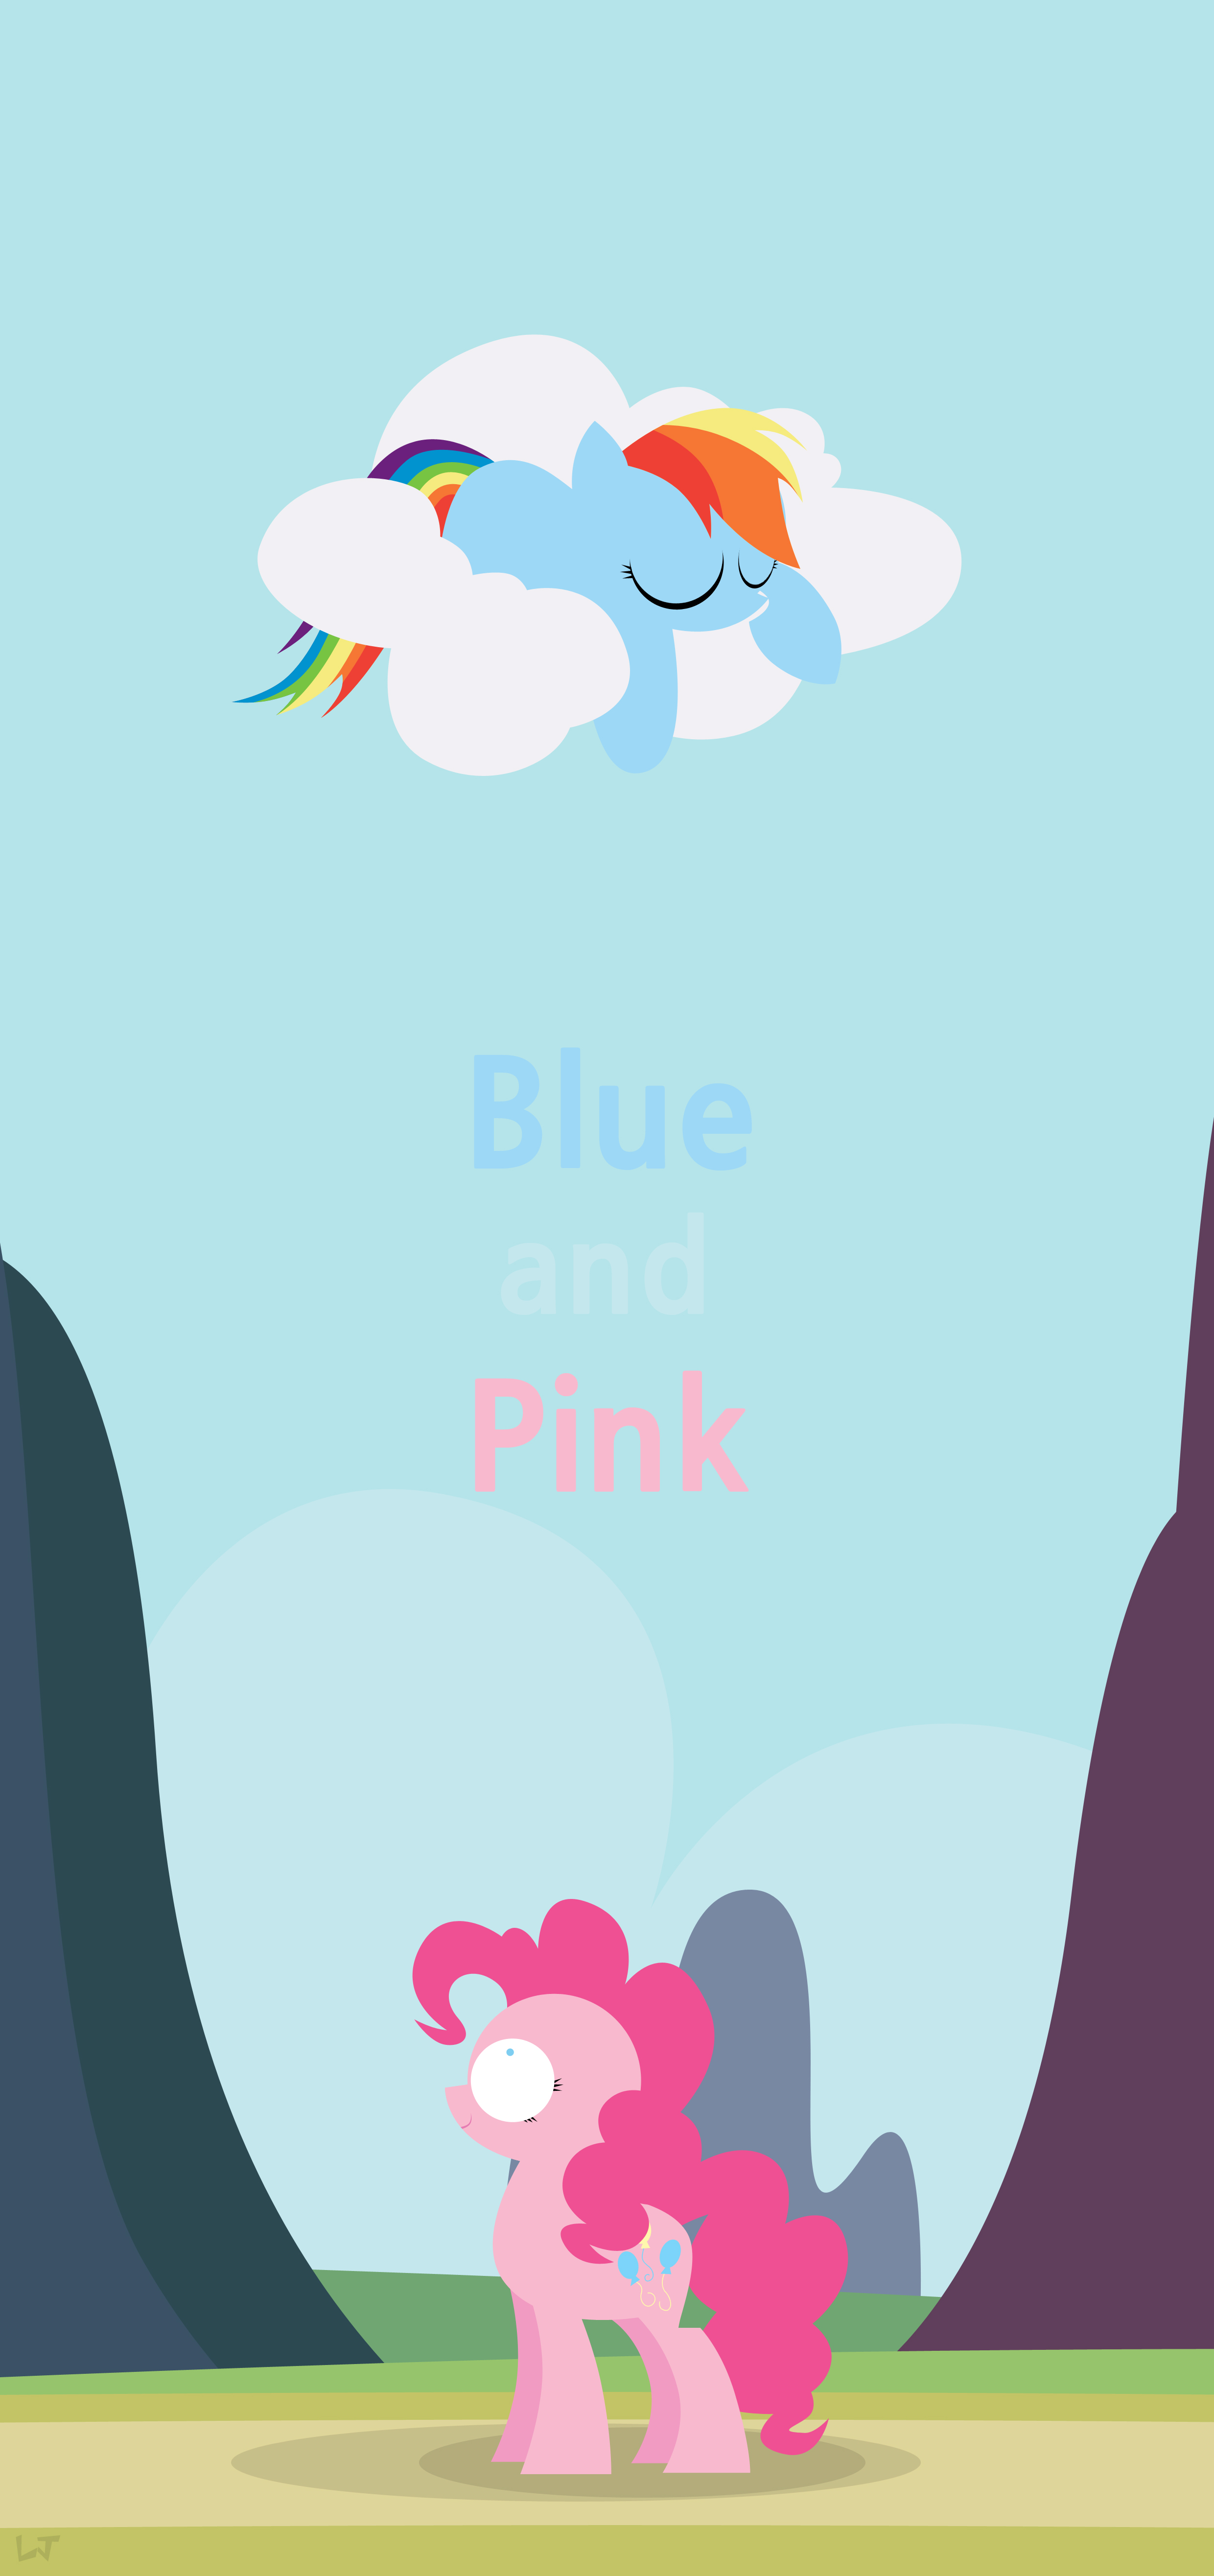 http://orig12.deviantart.net/49b9/f/2015/130/c/9/blue_and_pink_by_limejerry-d8su1i6.jpg